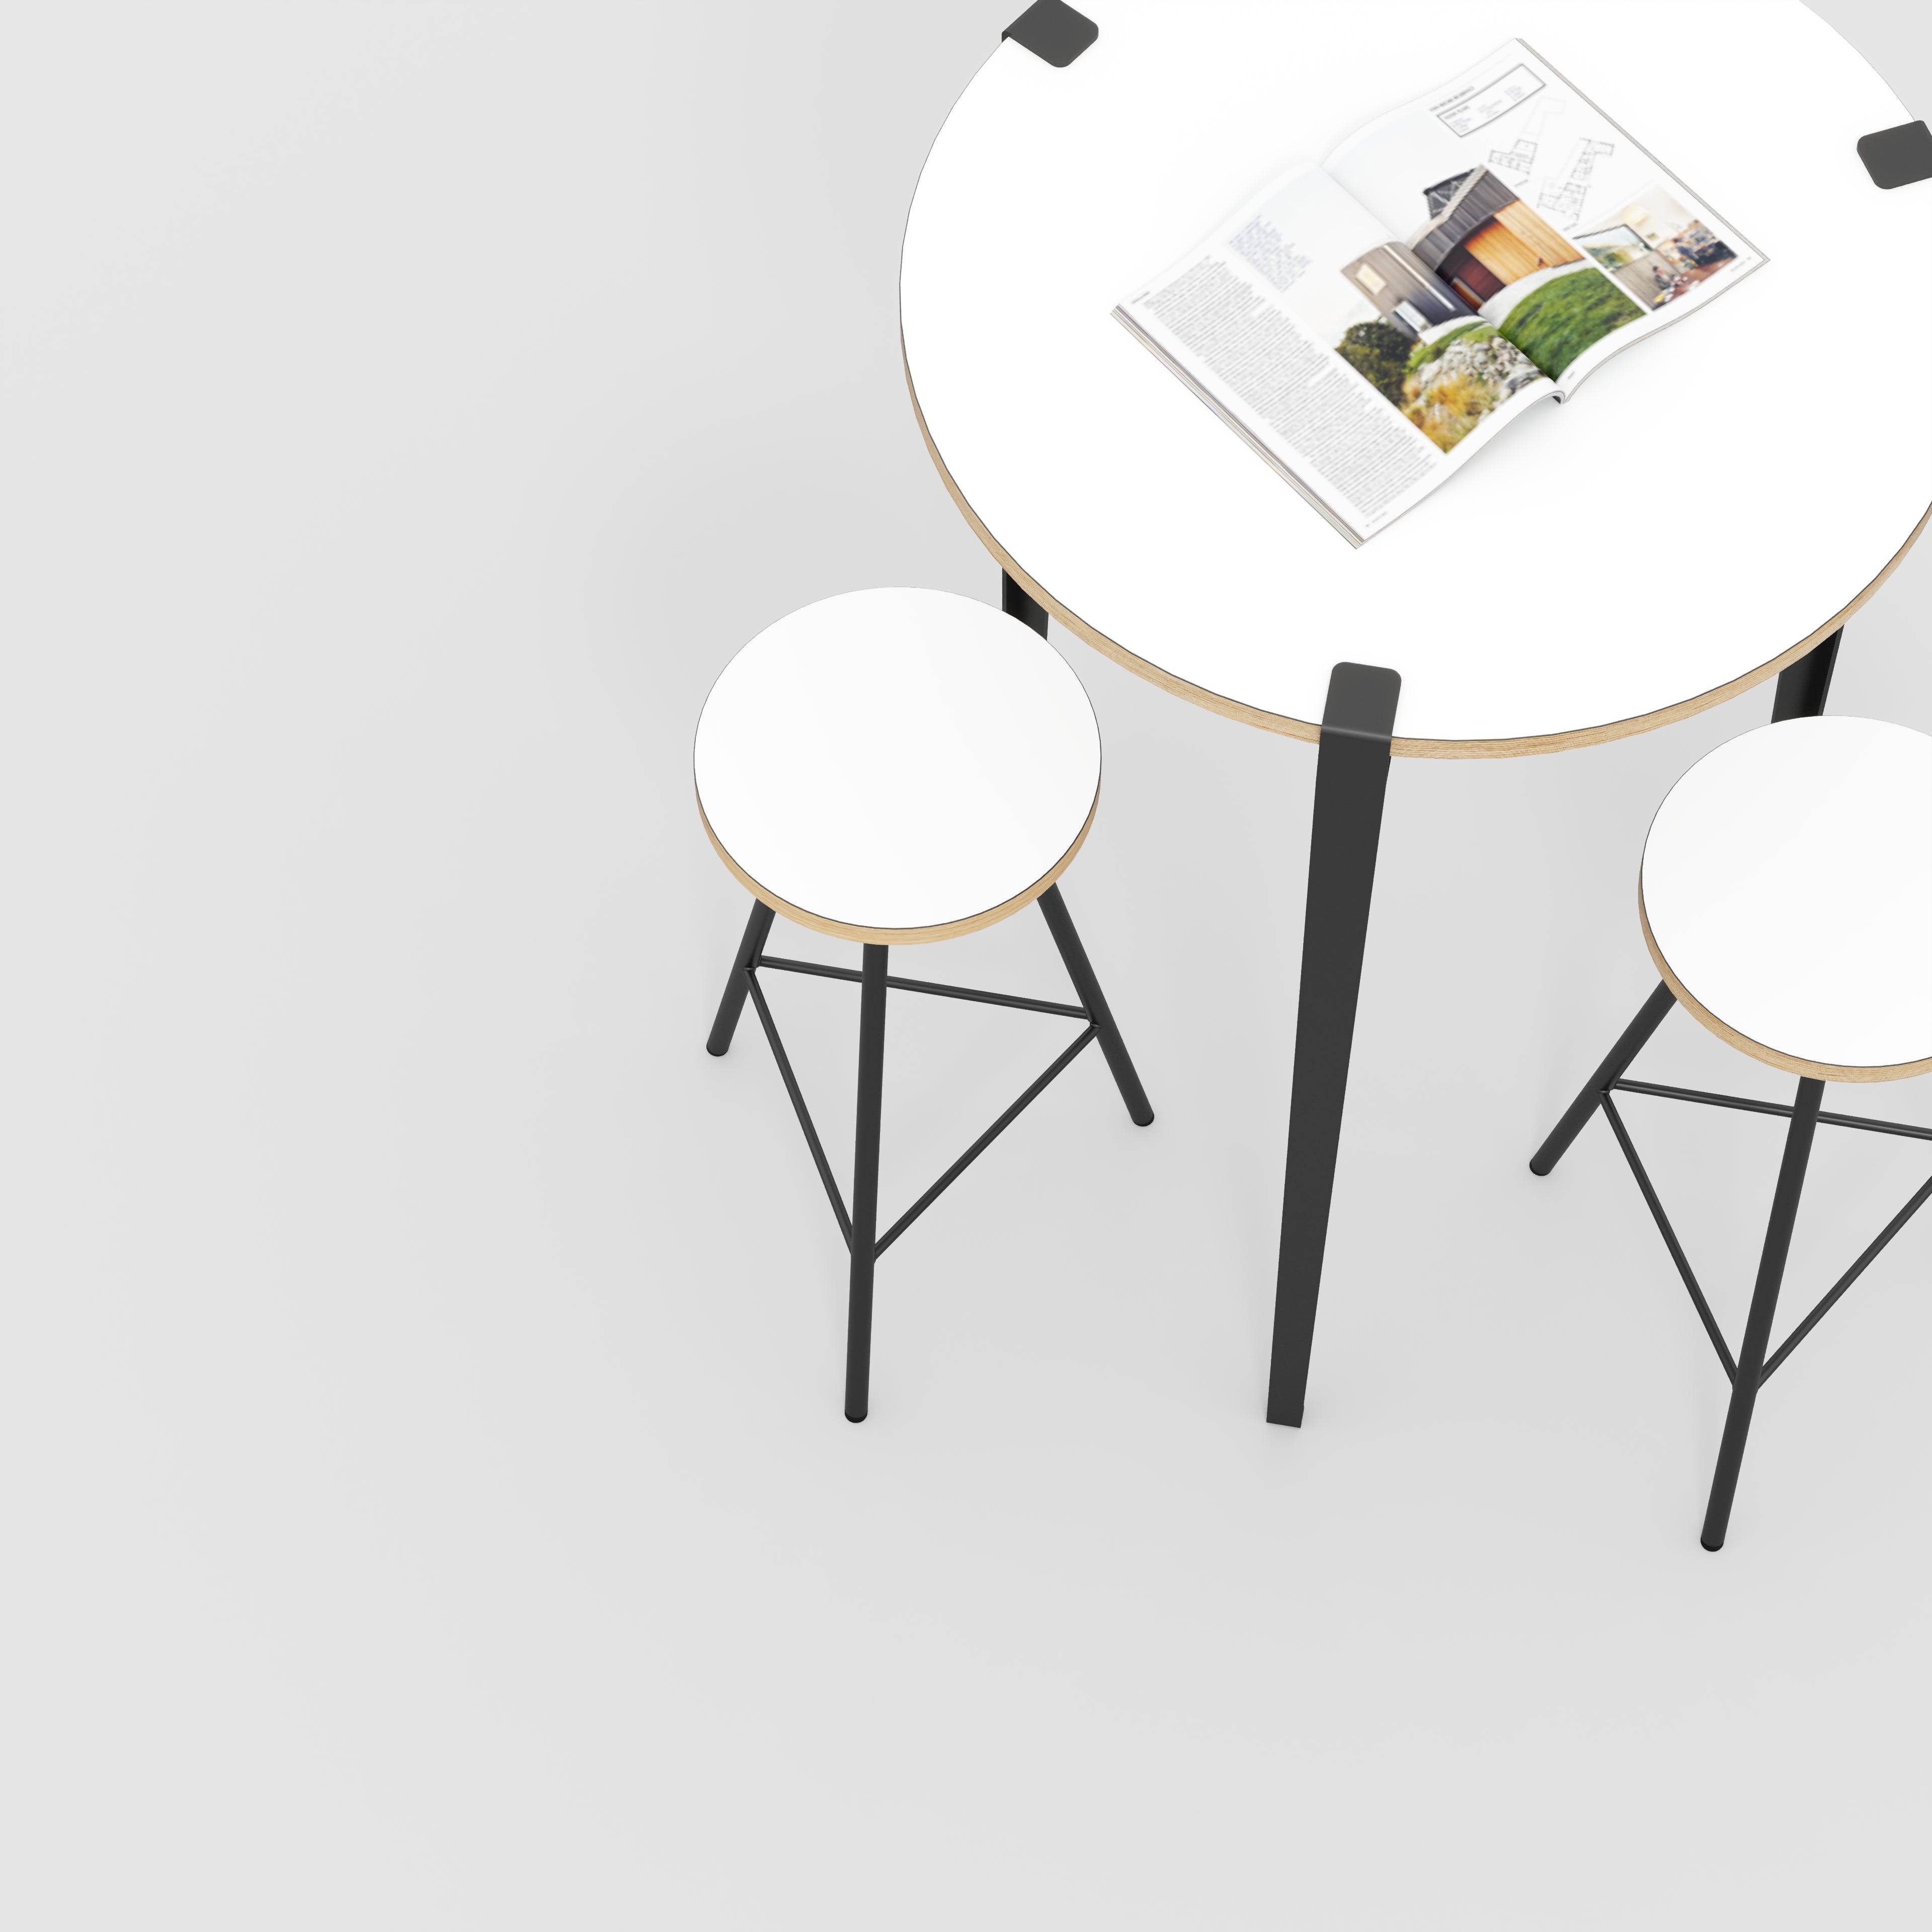 Round Table with Black Tiptoe Legs - Formica White - 800(dia) x 1100(h)